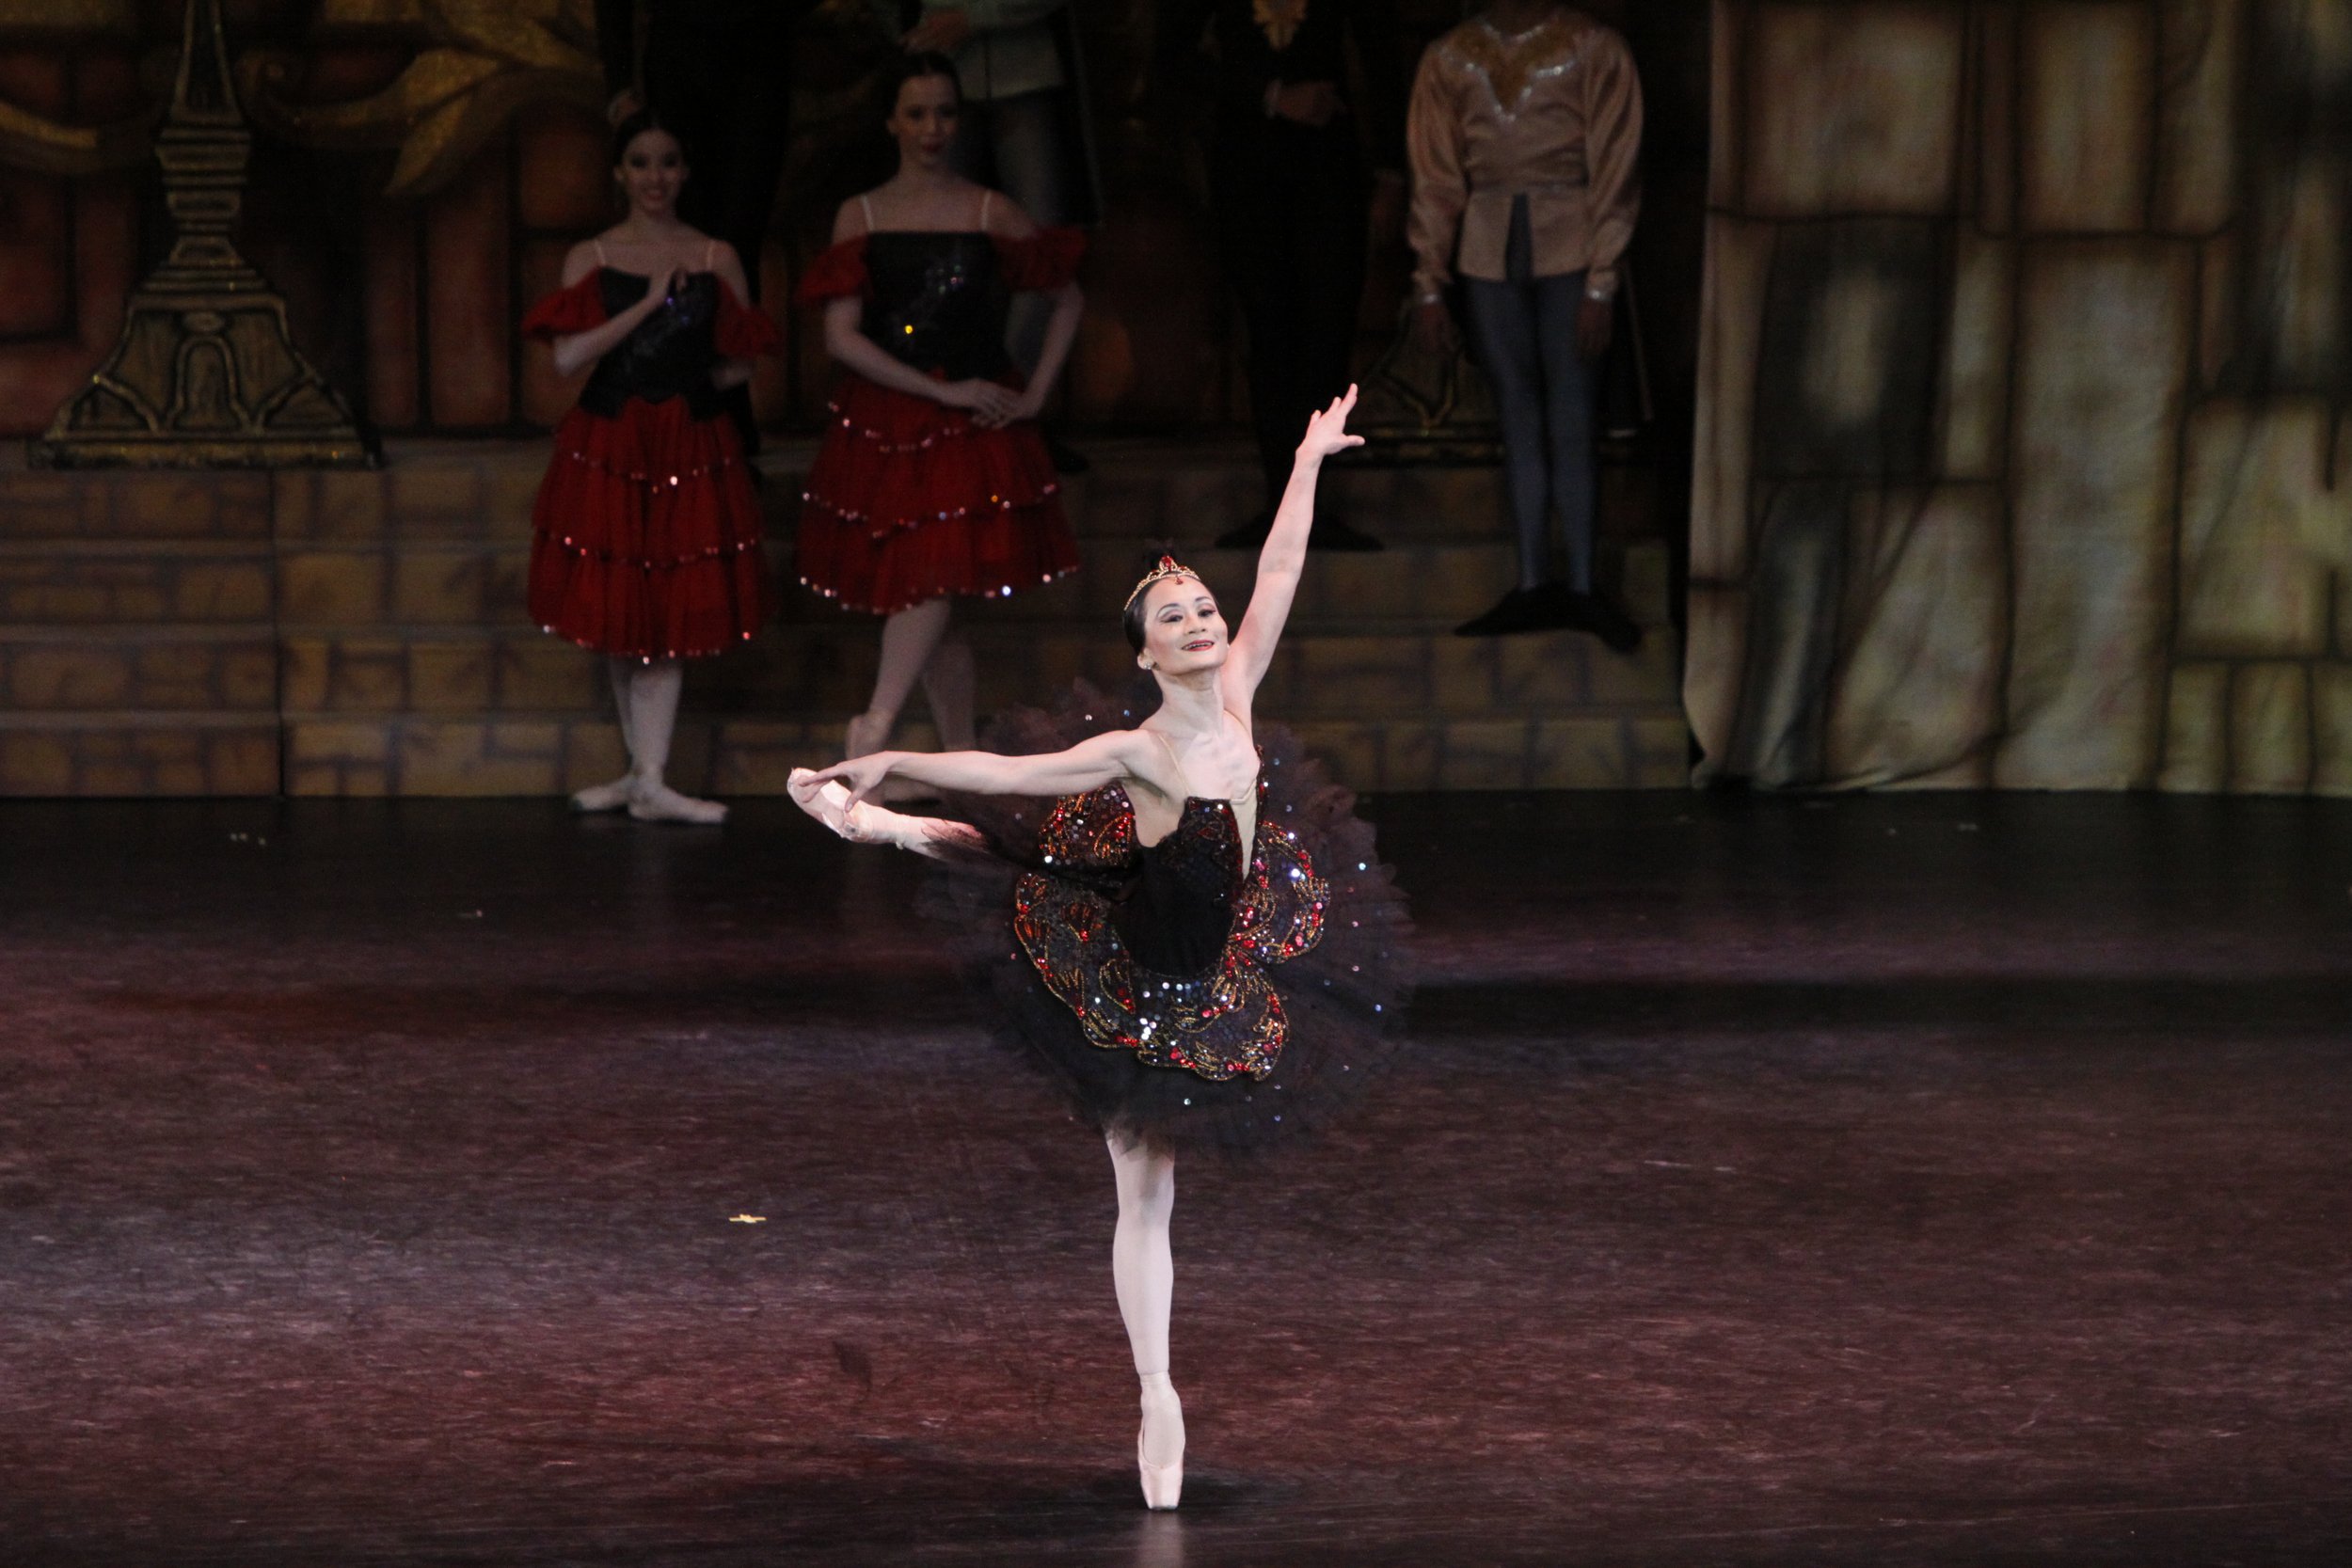    In her farewell performance as the scheming Odile ( Swan Lake , 2011), Lisa Macuja-Elizalde fools Prince Siegfried into thinking that she is the sweet and innocent Odette. But the black tutu should have clued him in that Odile is just a creepy alt